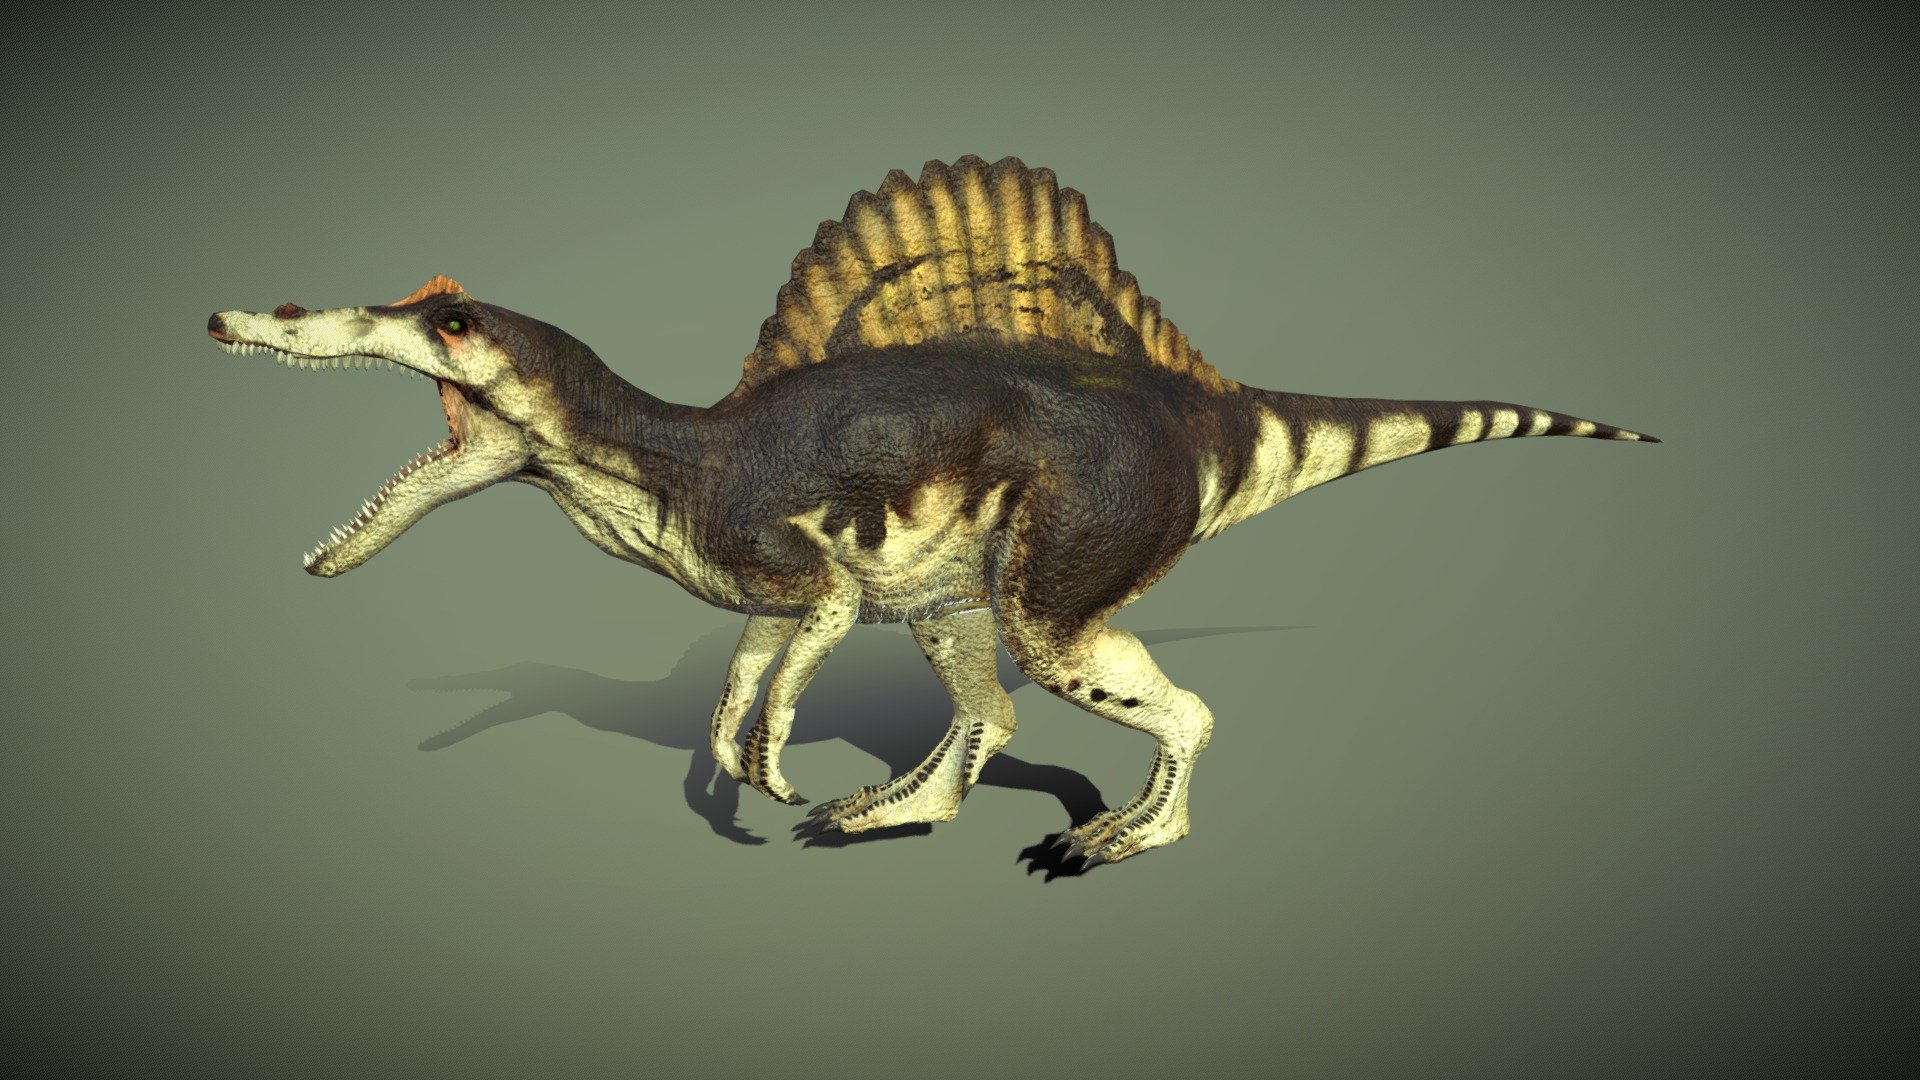 The Spinosaurus 3d was made in blender 2.9 and painted in substance painter , is subdivison ready , without subdivision it haves 6518 verts and when just subdividing the spino mesh, it haves 19550 verts , and when subdividing everything is 25952 verts , It is fully rigged with basic ik and constraints bones, in the blend file the rig is ready to use, i tested it in blender 3.0 and 3.2 and the rig works the same for me .

it have a total of 13 animations 

The texture comes with 4k, 2k and 1k textures : diffuse , normal , roughness (dry and wet) and AO maps , baked normal map from a high poly model and place it in the low poly model , uv wrapped it manually .

Comes with blend file and the textures attached in rar 3d model